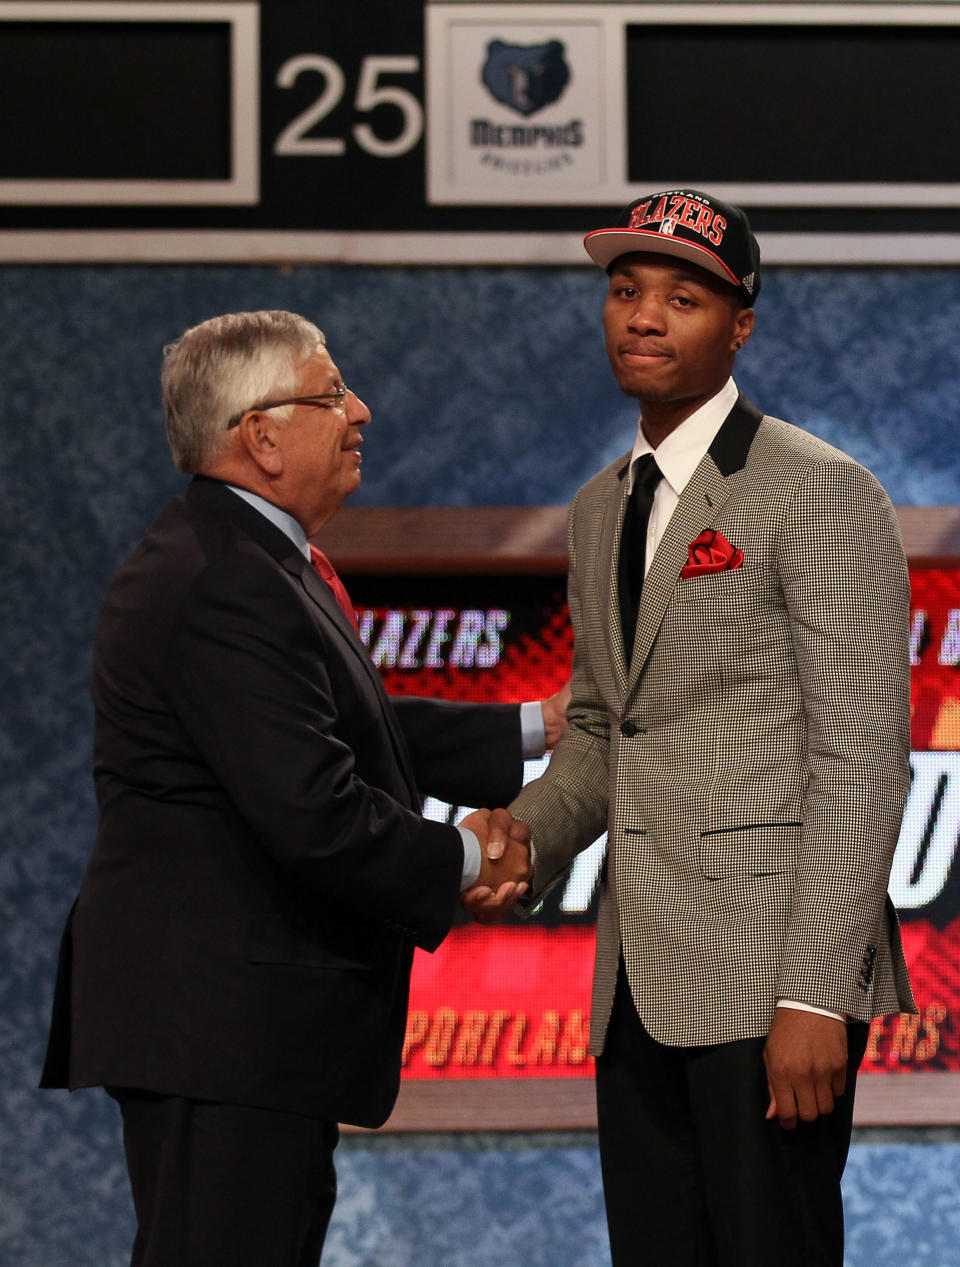 NEWARK, NJ - JUNE 28: Damian Lillard (R) of Weber State greets NBA Commissioner David Stern (L) after he was selected number six overall by the Portland Trail Blazers during the first round of the 2012 NBA Draft at Prudential Center on June 28, 2012 in Newark, New Jersey. NOTE TO USER: User expressly acknowledges and agrees that, by downloading and/or using this Photograph, user is consenting to the terms and conditions of the Getty Images License Agreement. (Photo by Elsa/Getty Images)